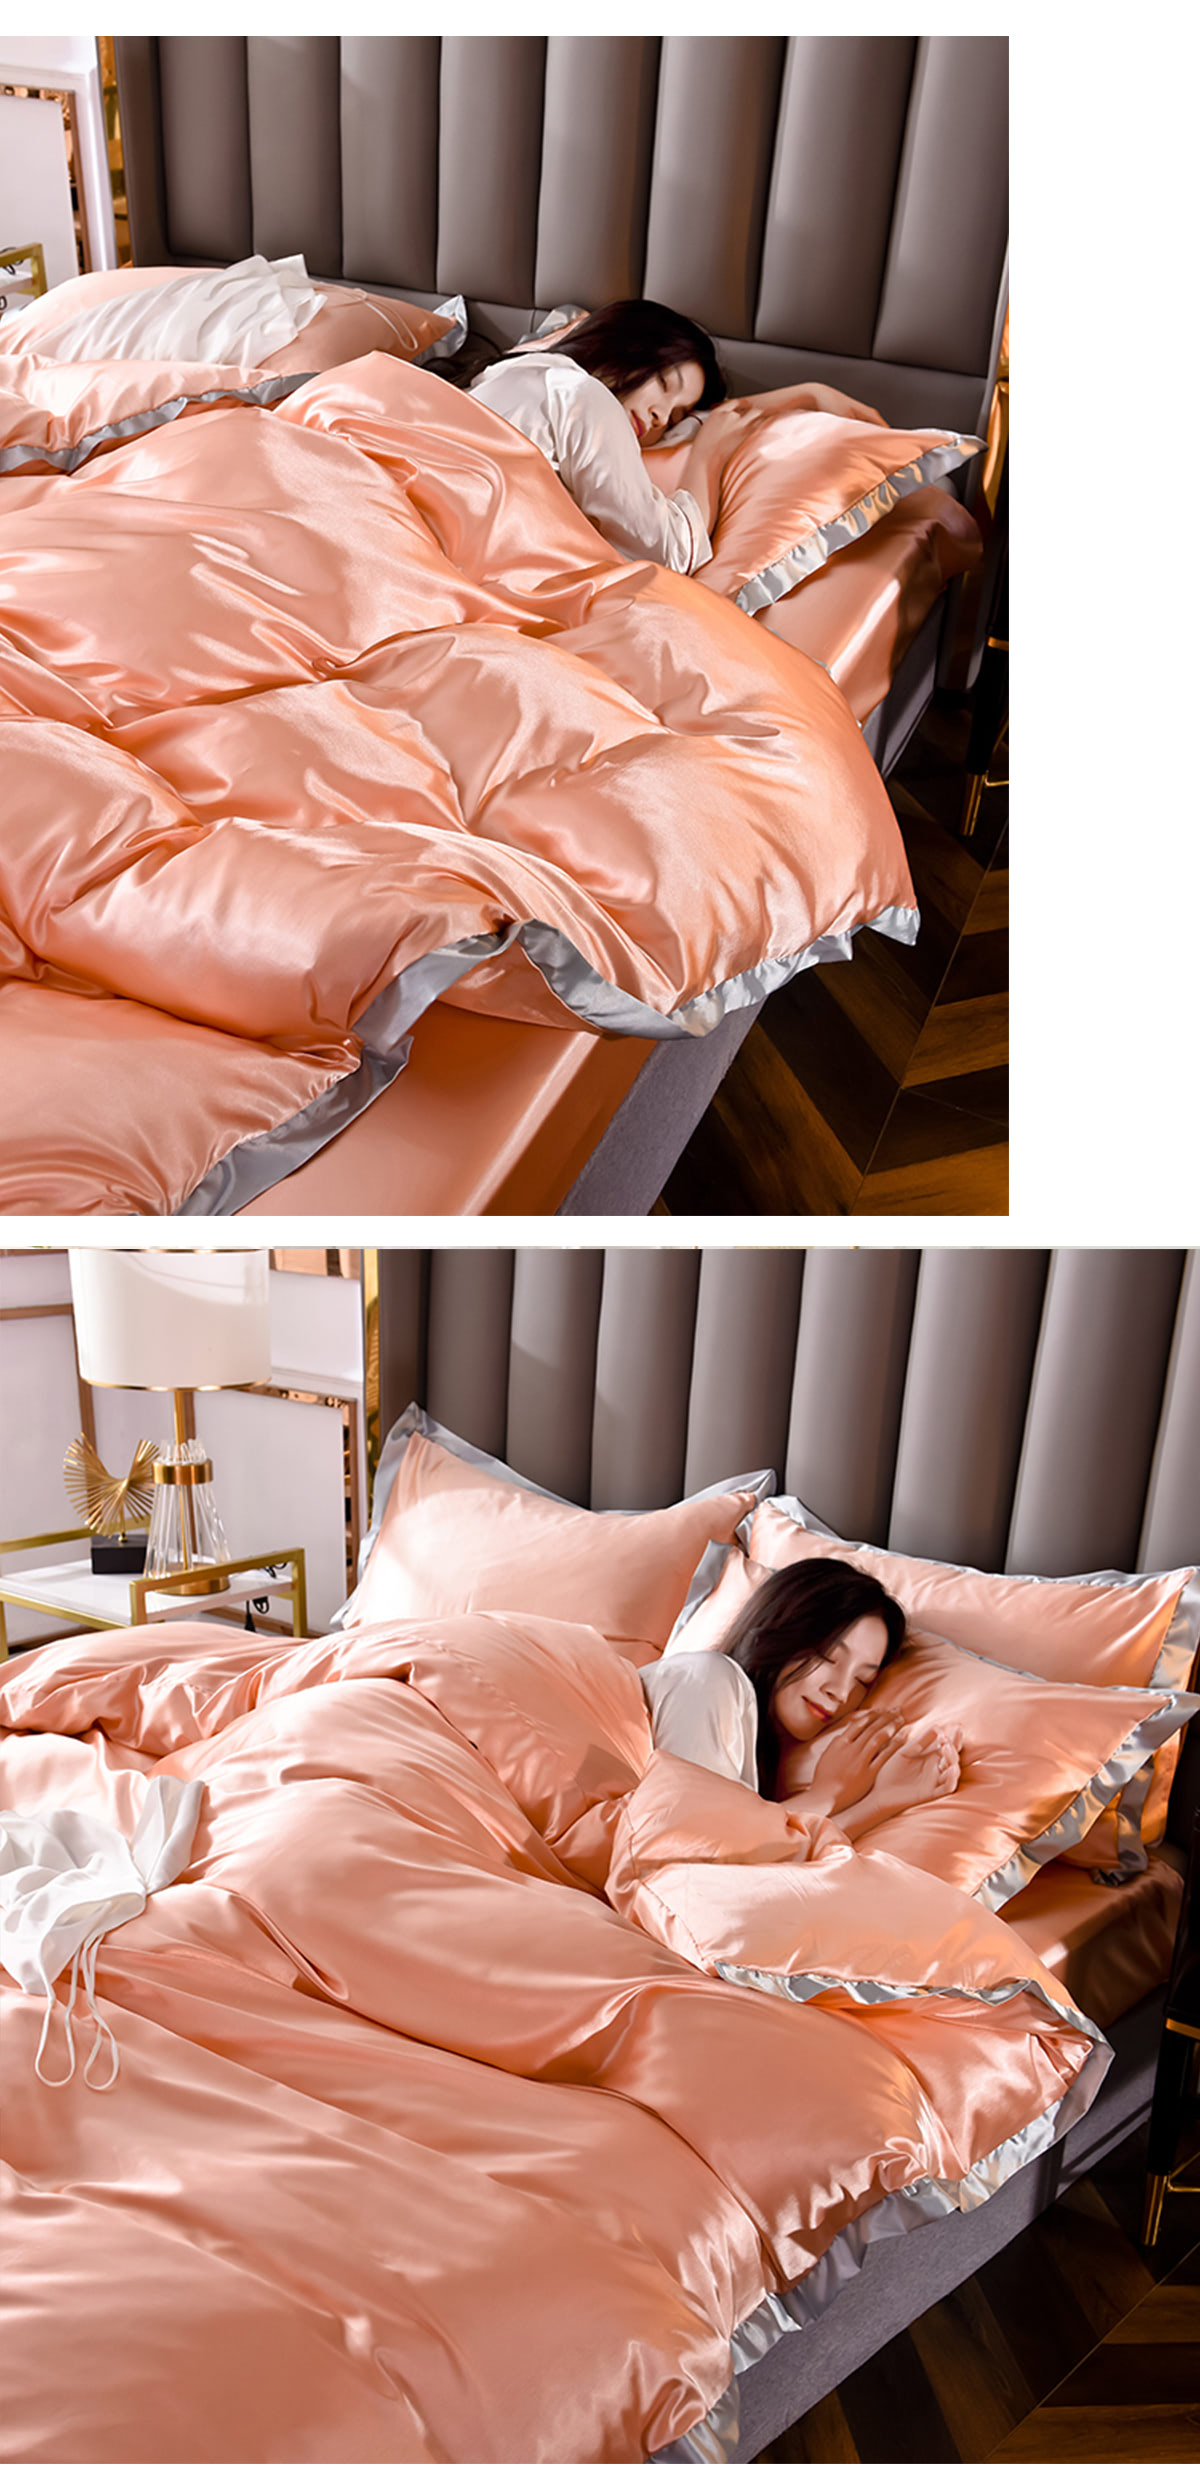 Fresh-and-Soft-Comfortable-Satin-Bed-Cover-Sheet-Set45.jpg